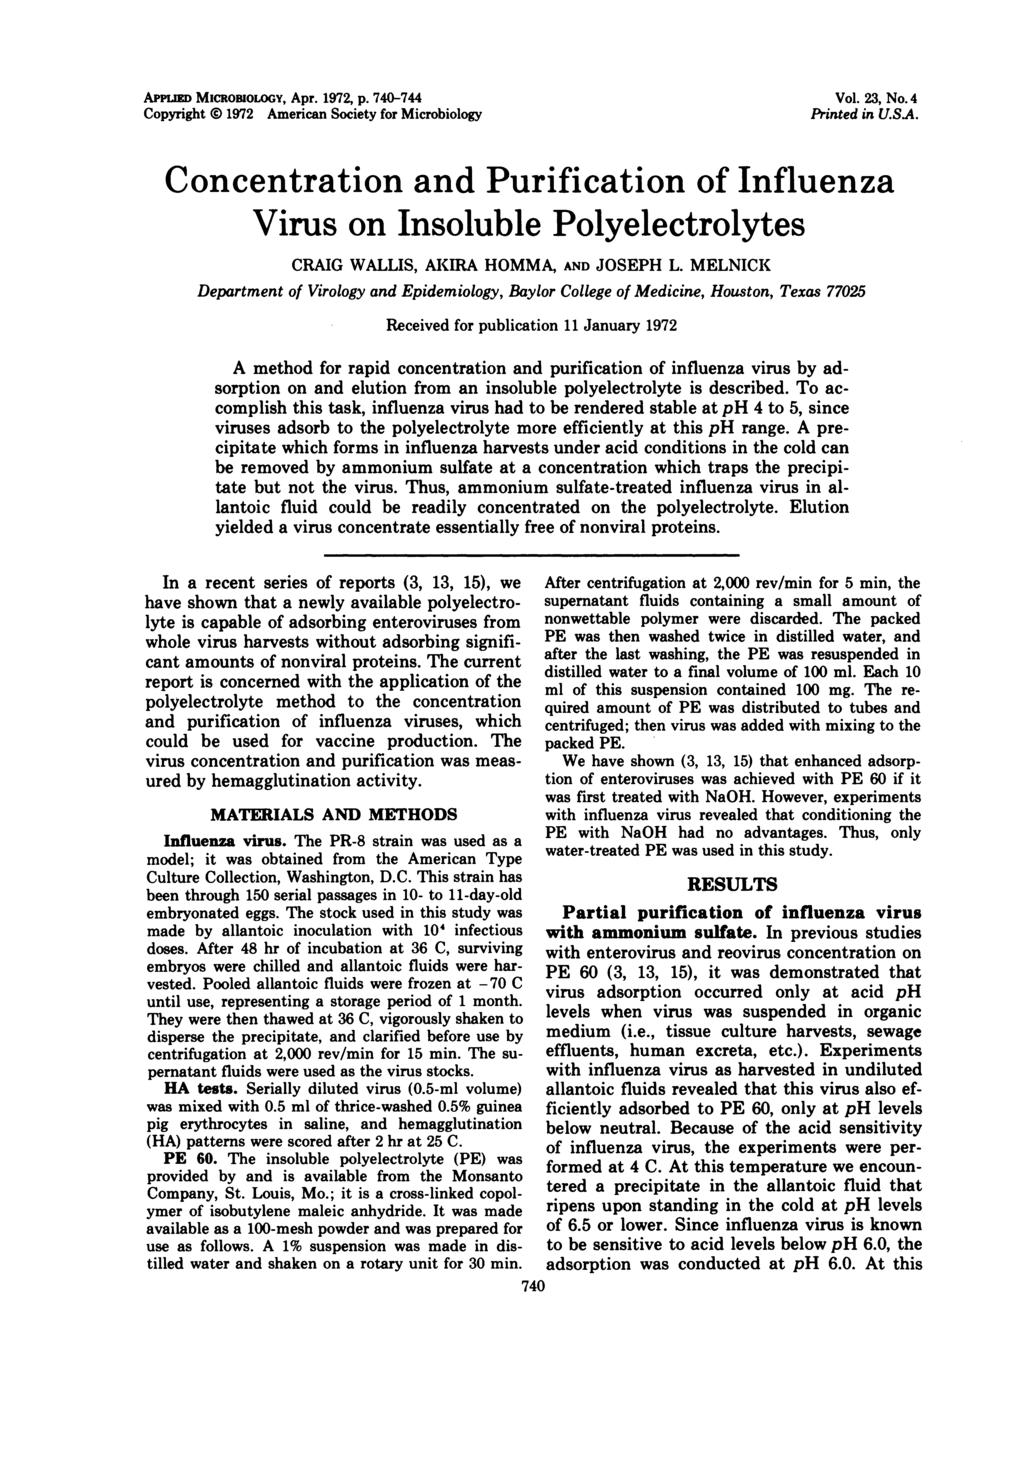 APPEuw MicRoBIoLoGY, Apr. 1972, p. 740-744 Copyright 0 1972 American Society for Microbiology Vol. 23, No. 4 Printed in U.S.A. Concentration and Purification of Influenza Virus on Insoluble Polyelectrolytes CRAIG WALLIS, AKIRA HOMMA, AND JOSEPH L.